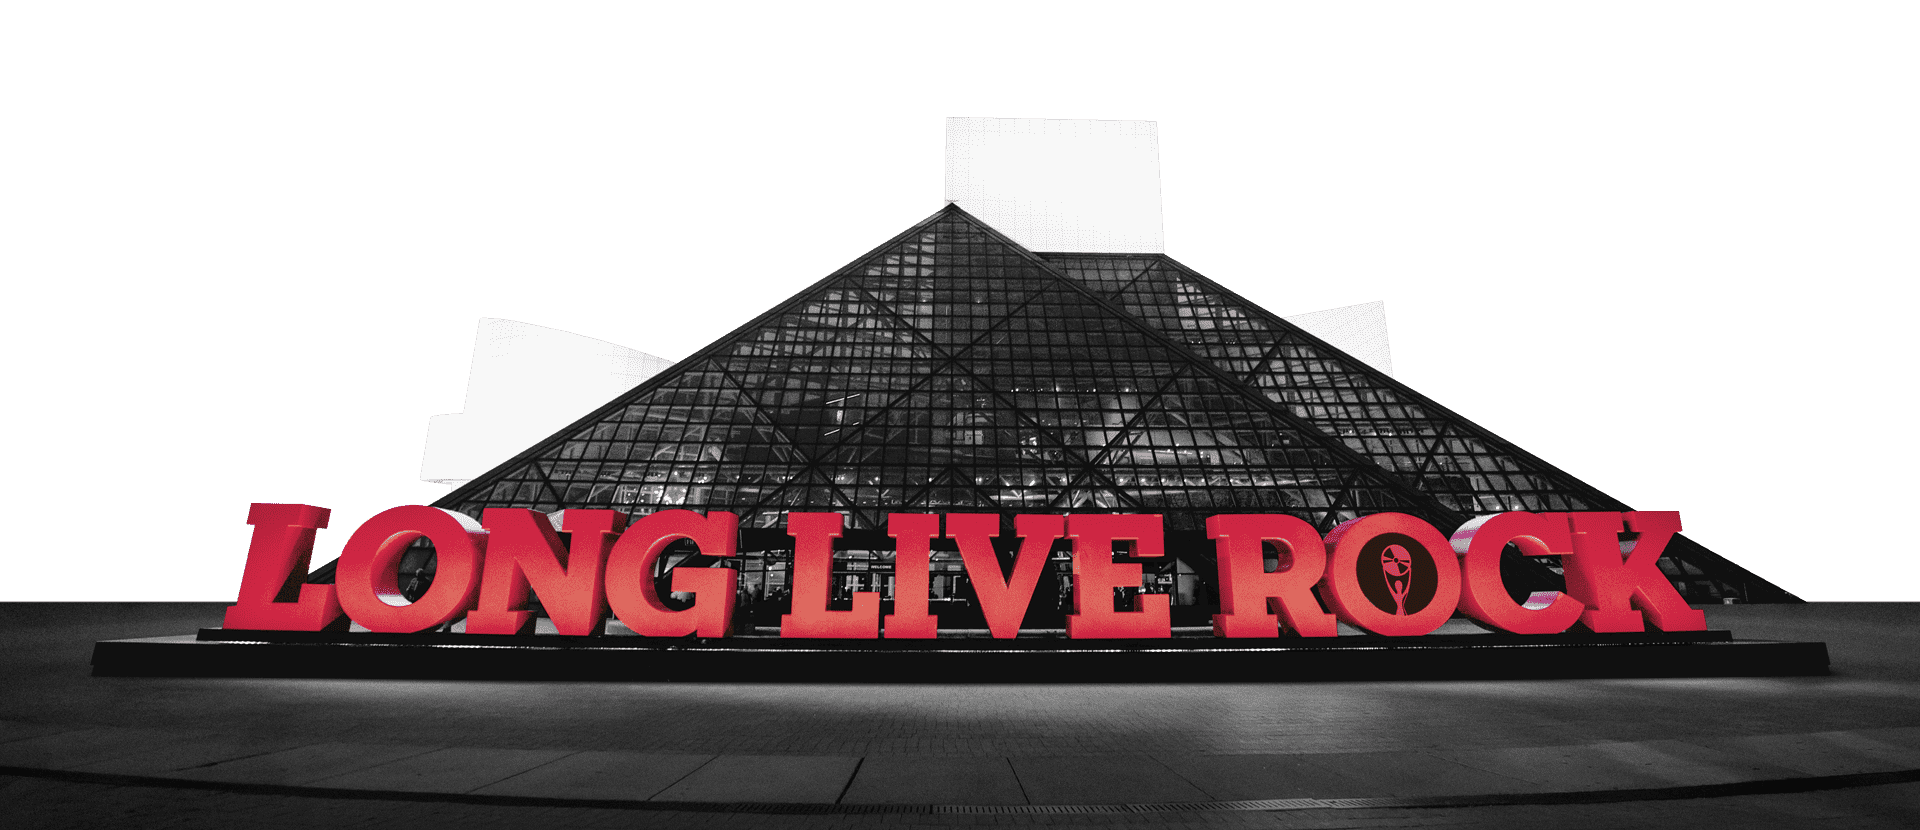 Rock And Roll Hall Of Fame Wallpapers